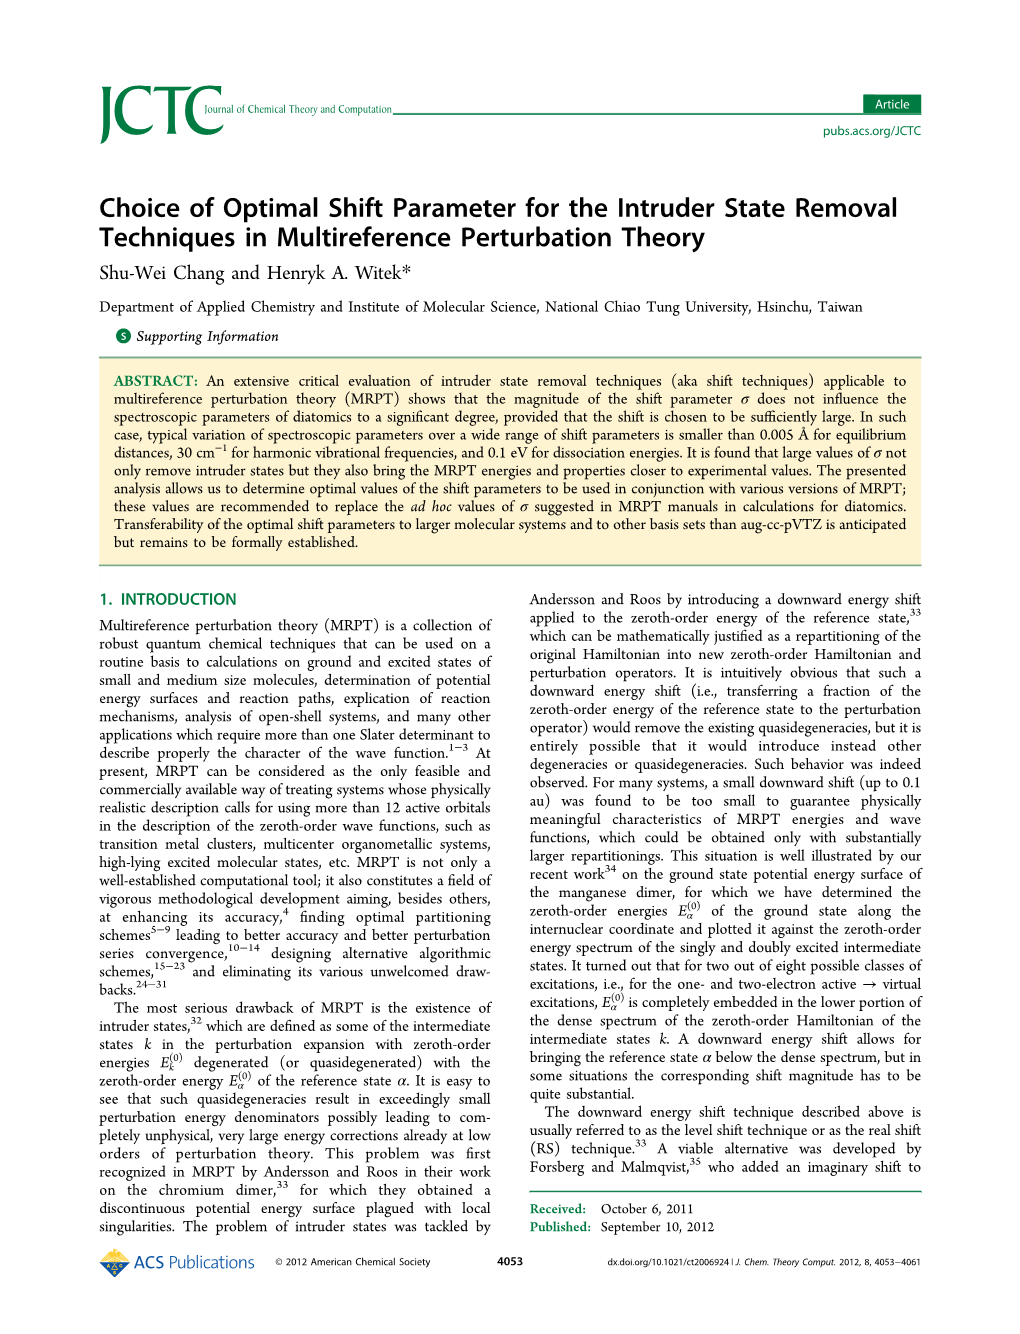 Choice of Optimal Shift Parameter for the Intruder State Removal Techniques in Multireference Perturbation Theory Shu-Wei Chang and Henryk A